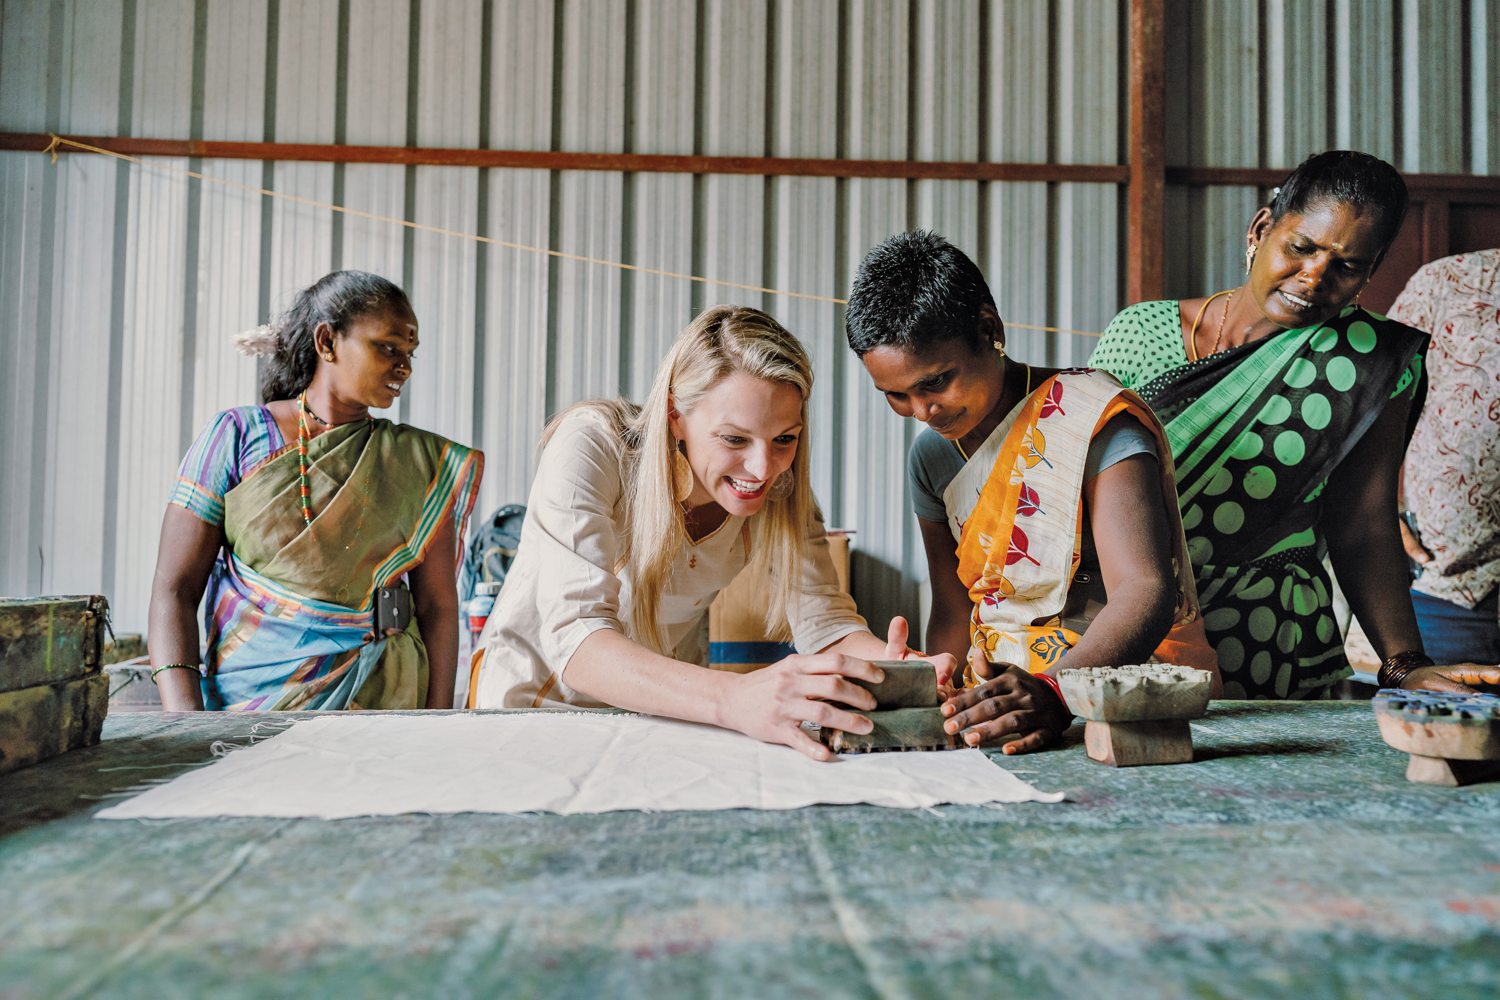 Mallory Matrin wood-block printing textiles with modern-day slavery survivors in South Asia